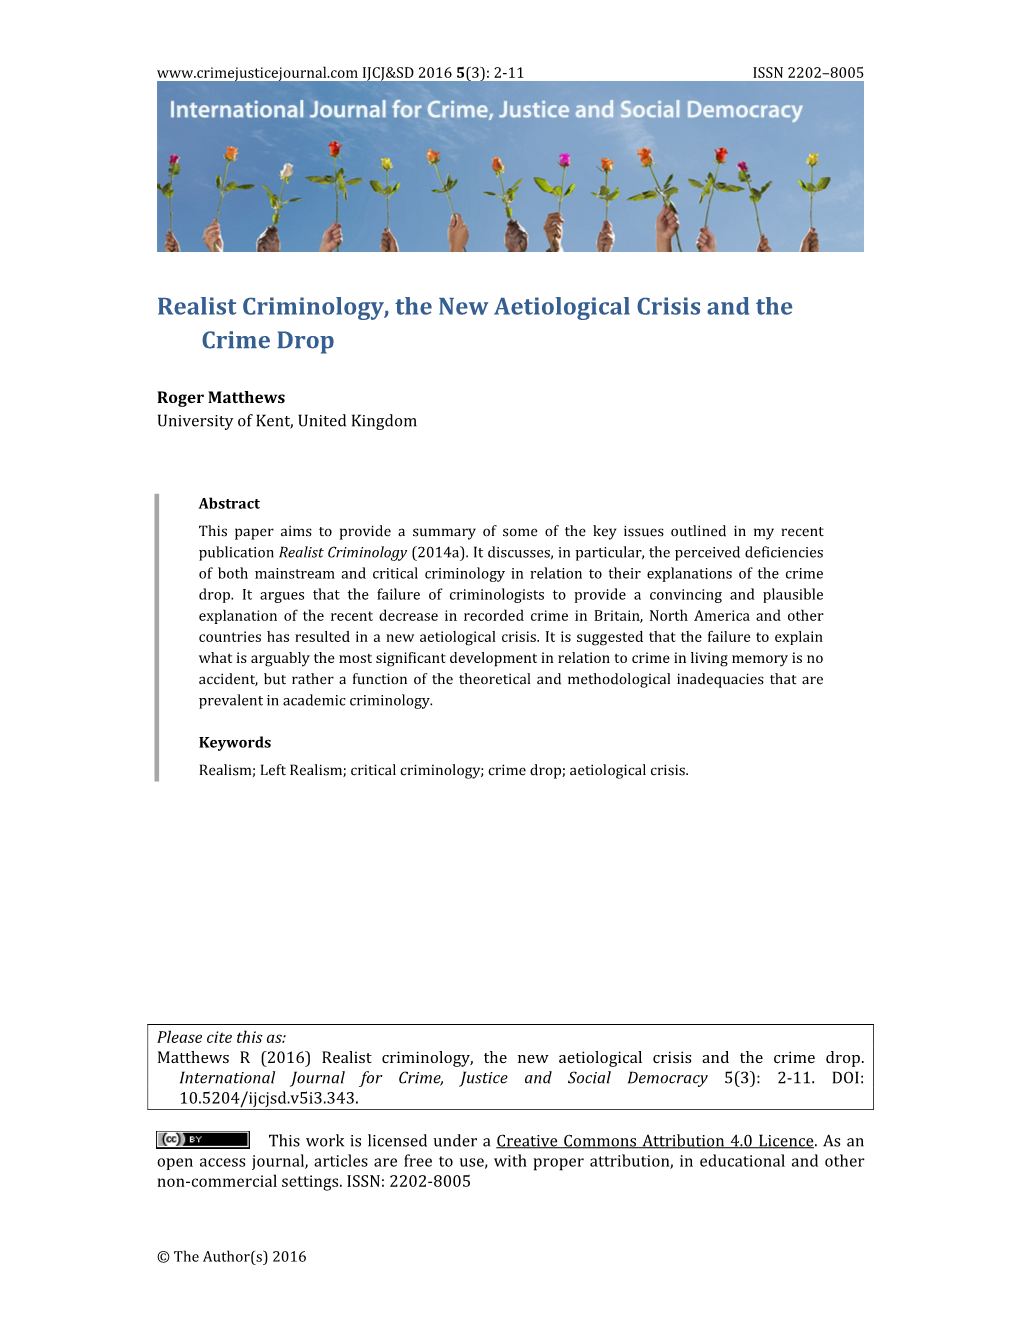 Realist Criminology, the New Aetiological Crisis and the Crime Drop